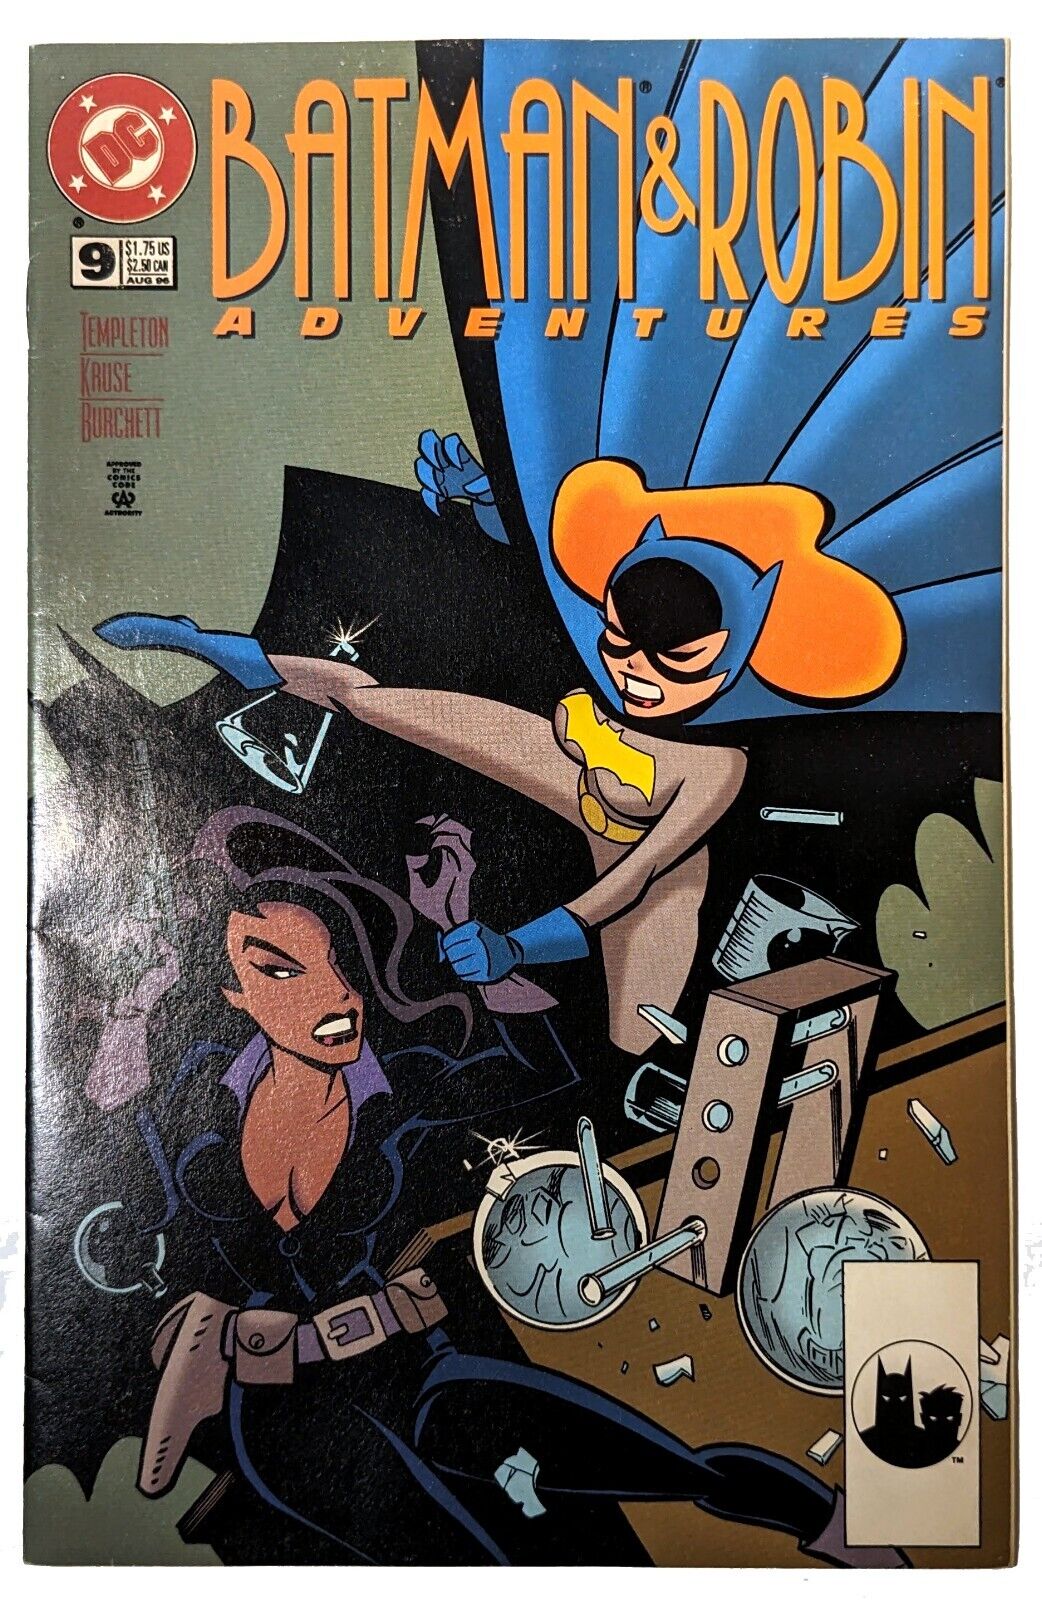 The Batman and Robin Adventures #9 DC (1996) Variant Cover Comic Book